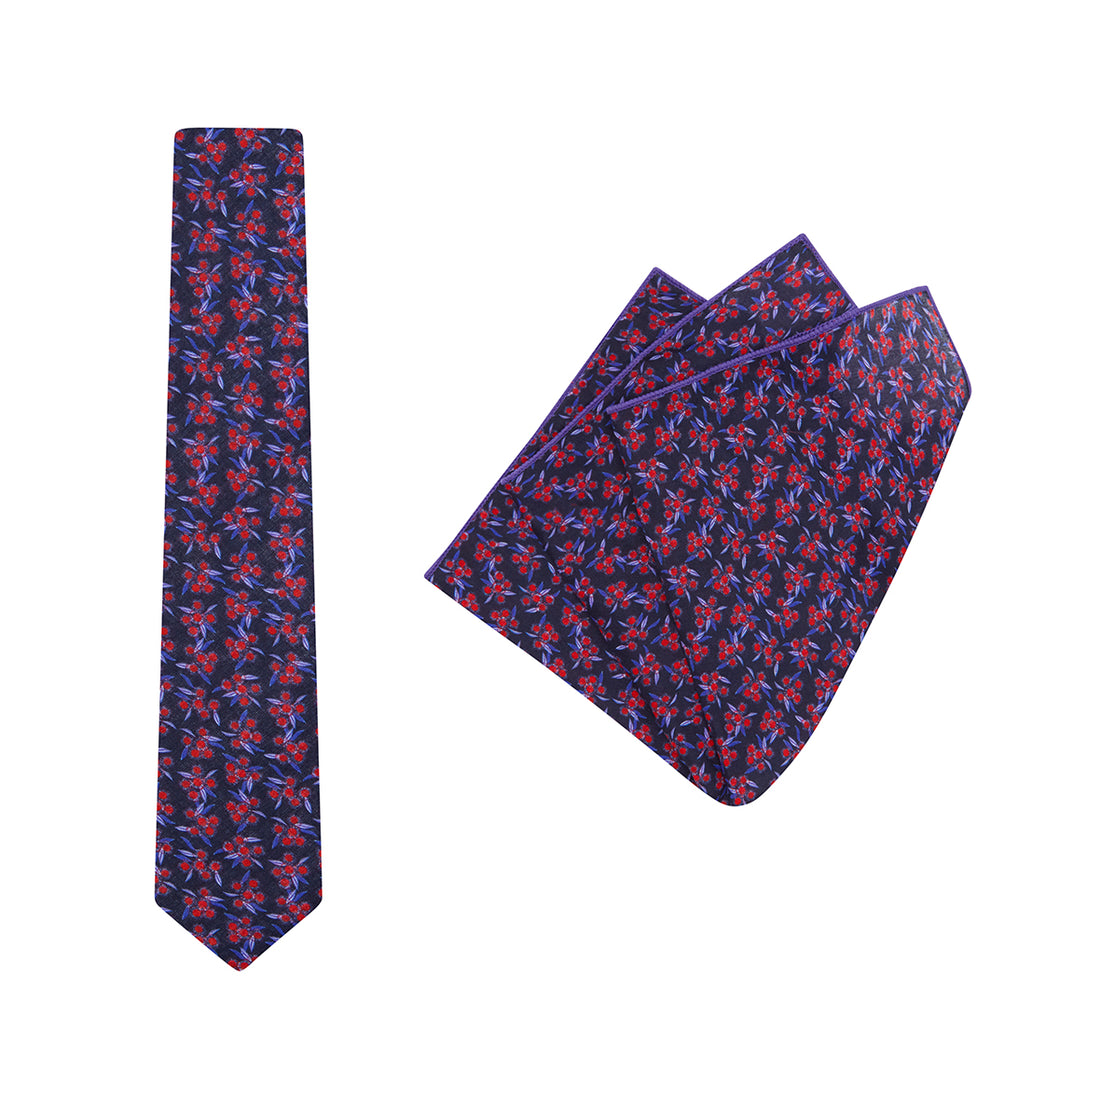 TIE + POCKET SQUARE SET. Jocelyn Proust Hakea Laurina Print. Supplied with matching pocket square.-Ties-PEROZ Accessories